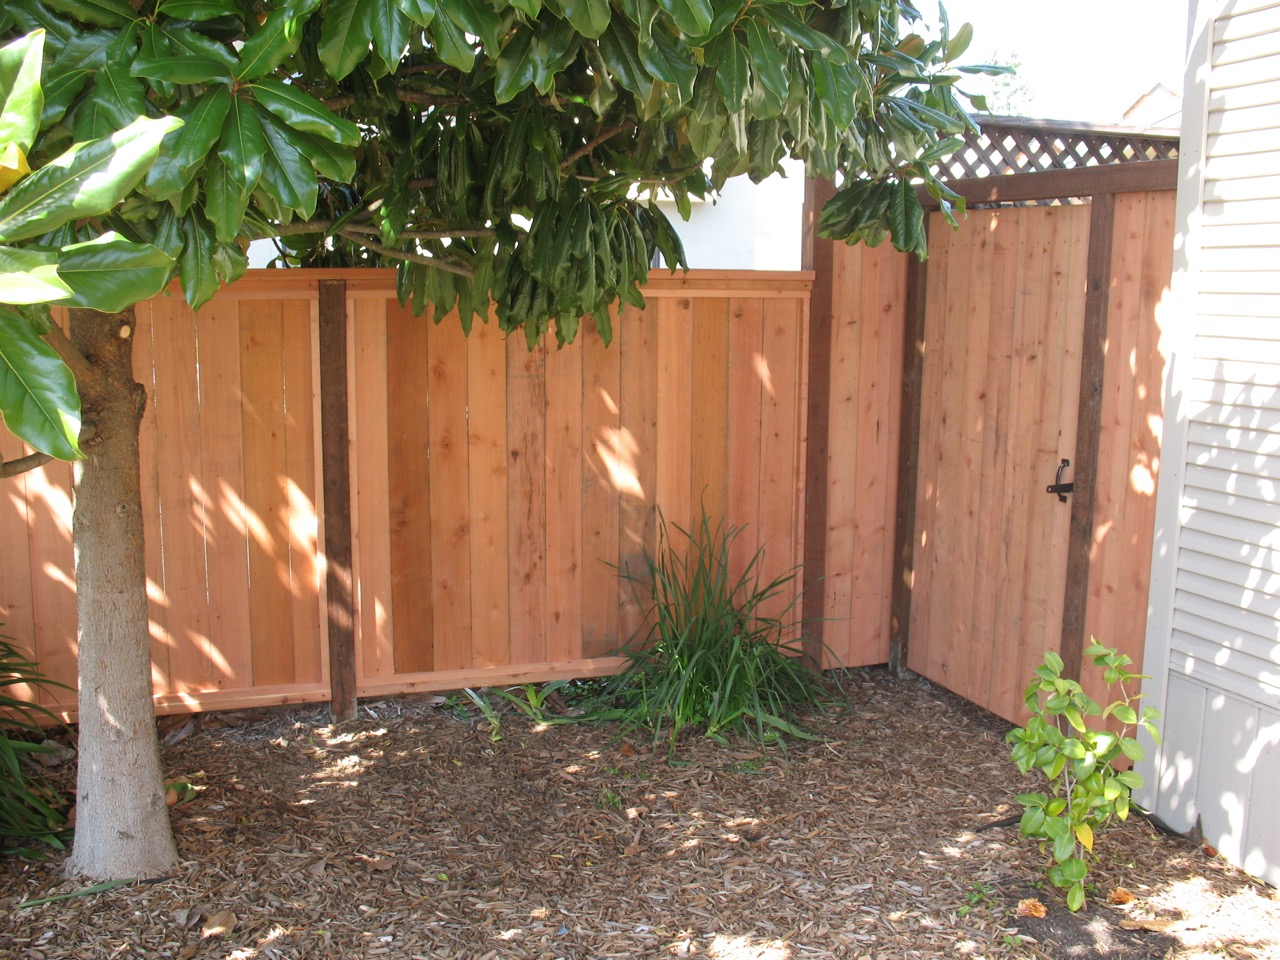 Residential privacy fence and gate